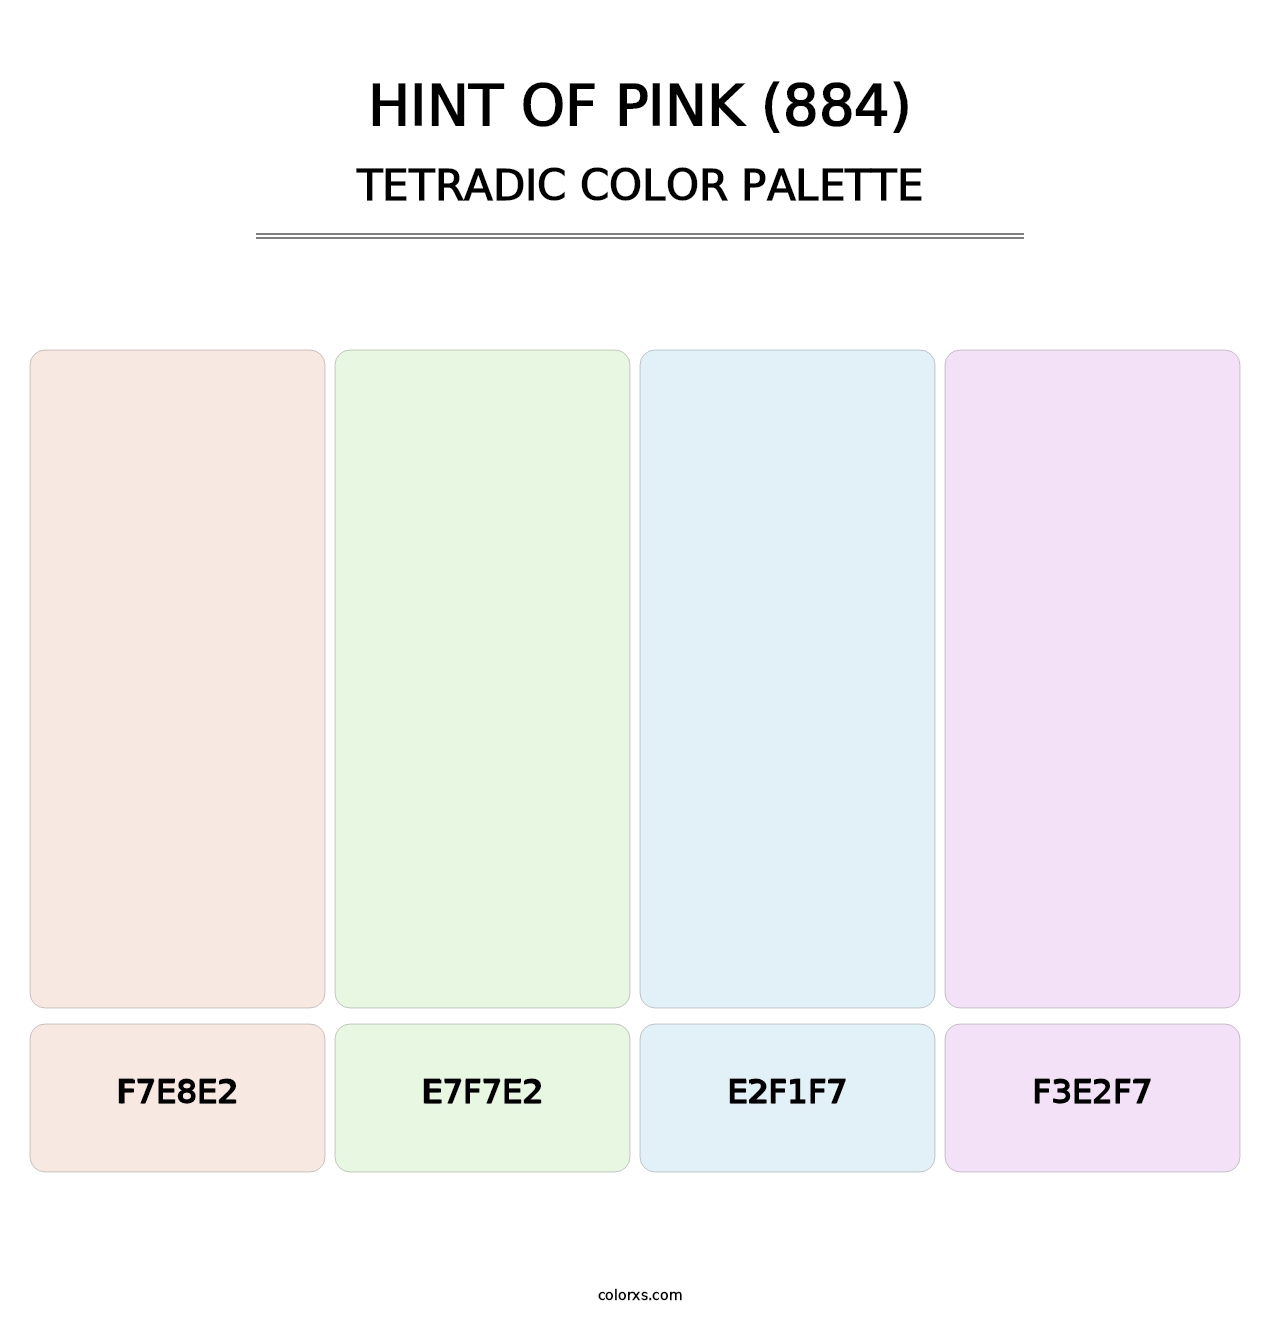 Hint of Pink (884) - Tetradic Color Palette